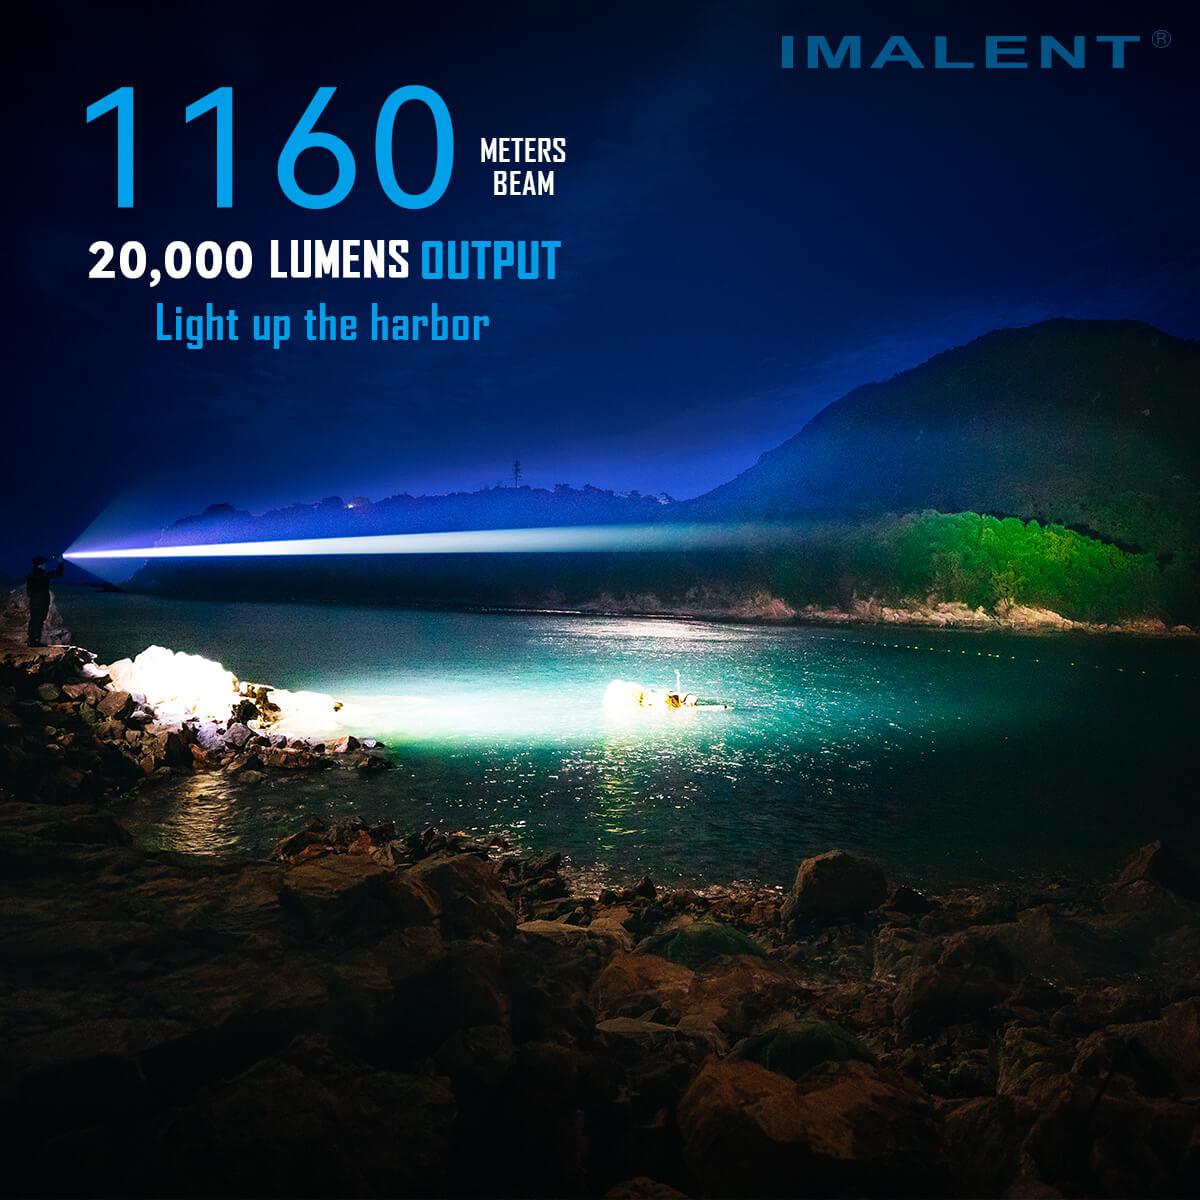 Imalent RS50 review  20,000 lumen flashlight with 1,200 meters